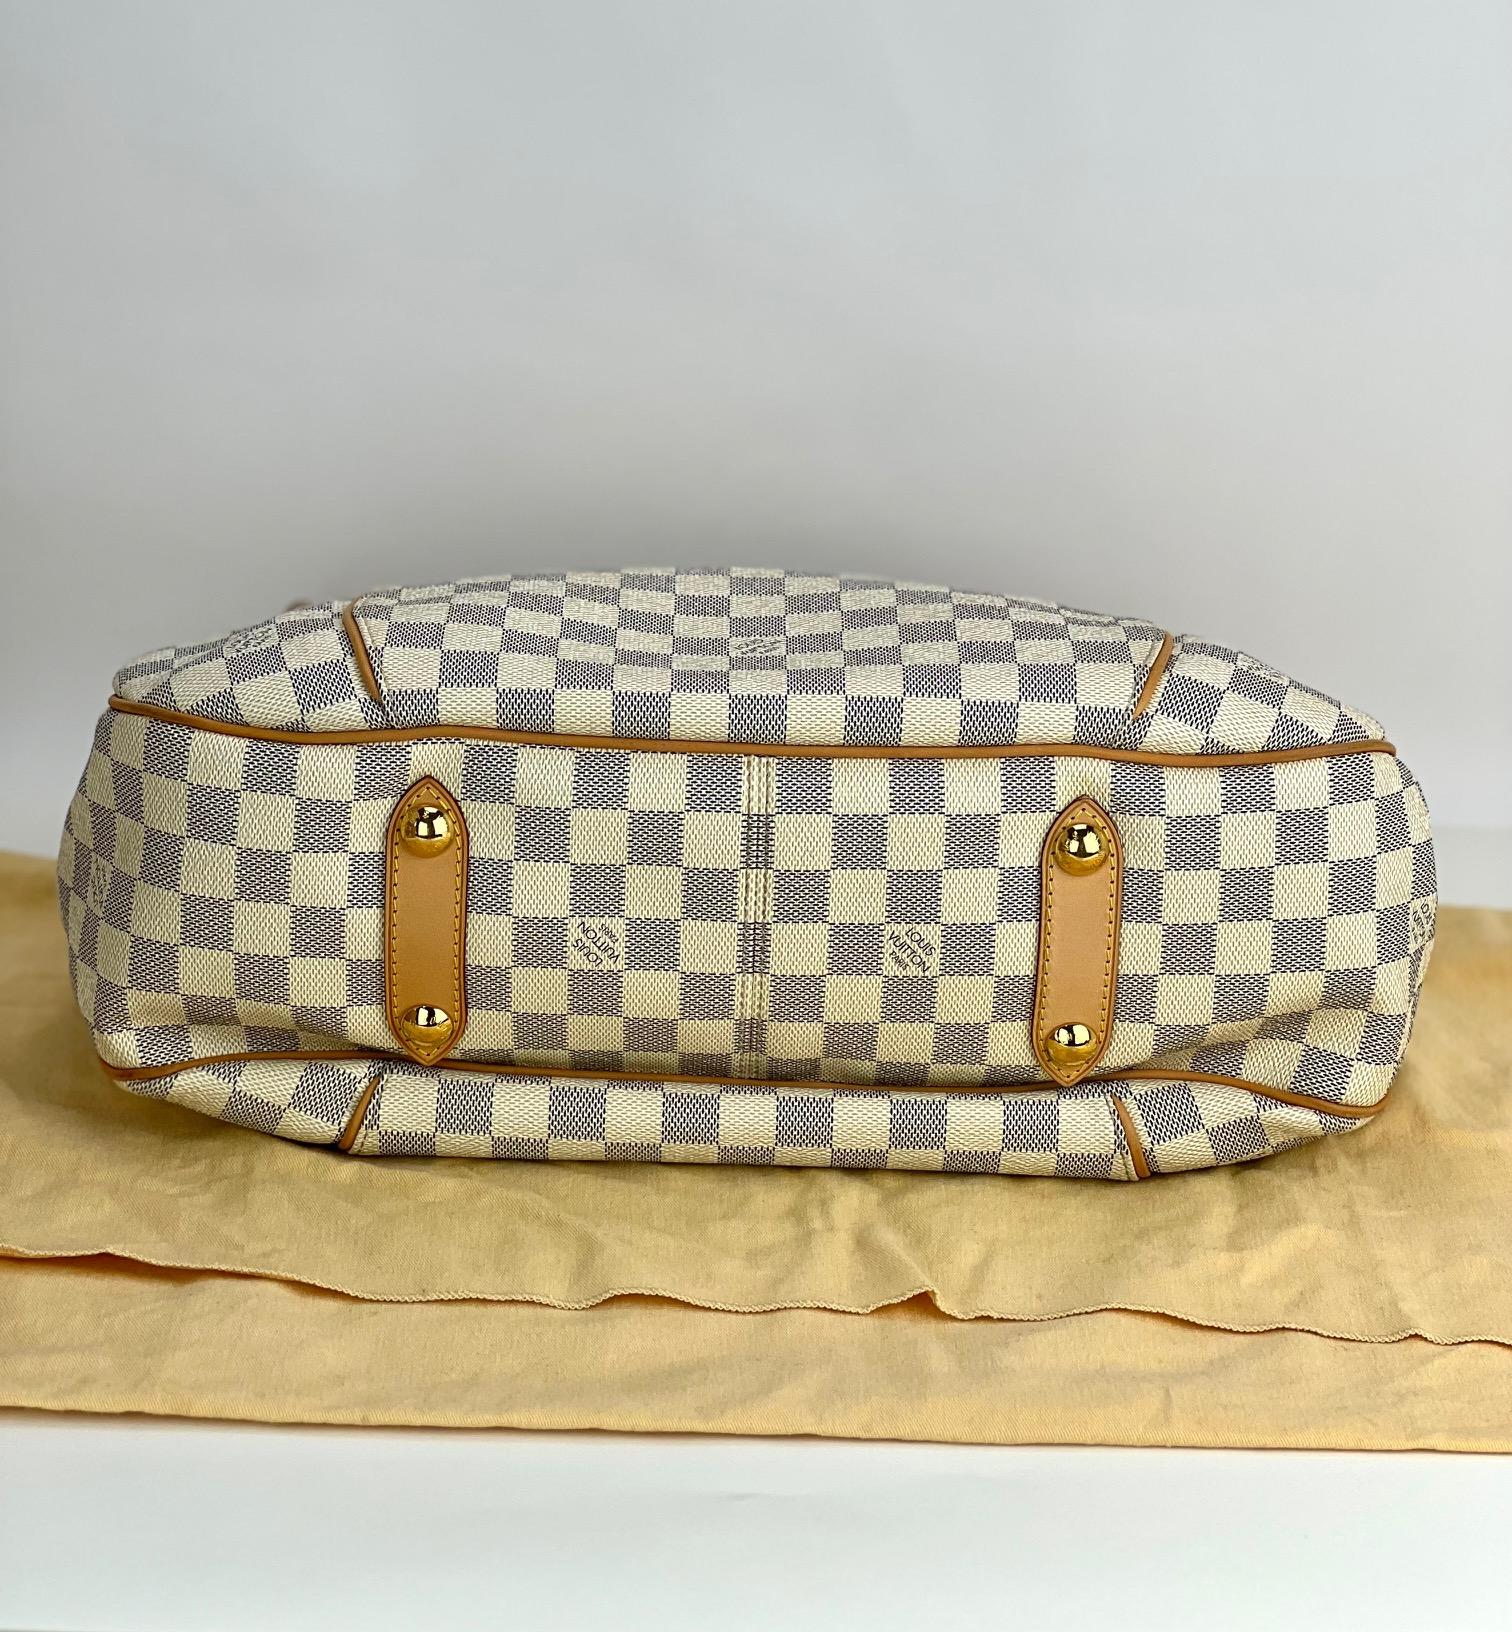 Pre-Owned  100% Authentic
Louis Vuitton Galliera PM Damier Azur
W/added insert to help keep shape
RATING: A/B   very good, well maintained,
shows minor signs of wear
MATERIAL: damier azur canvas, leather
CLOSURE: magnetic snap
PIPING: color is